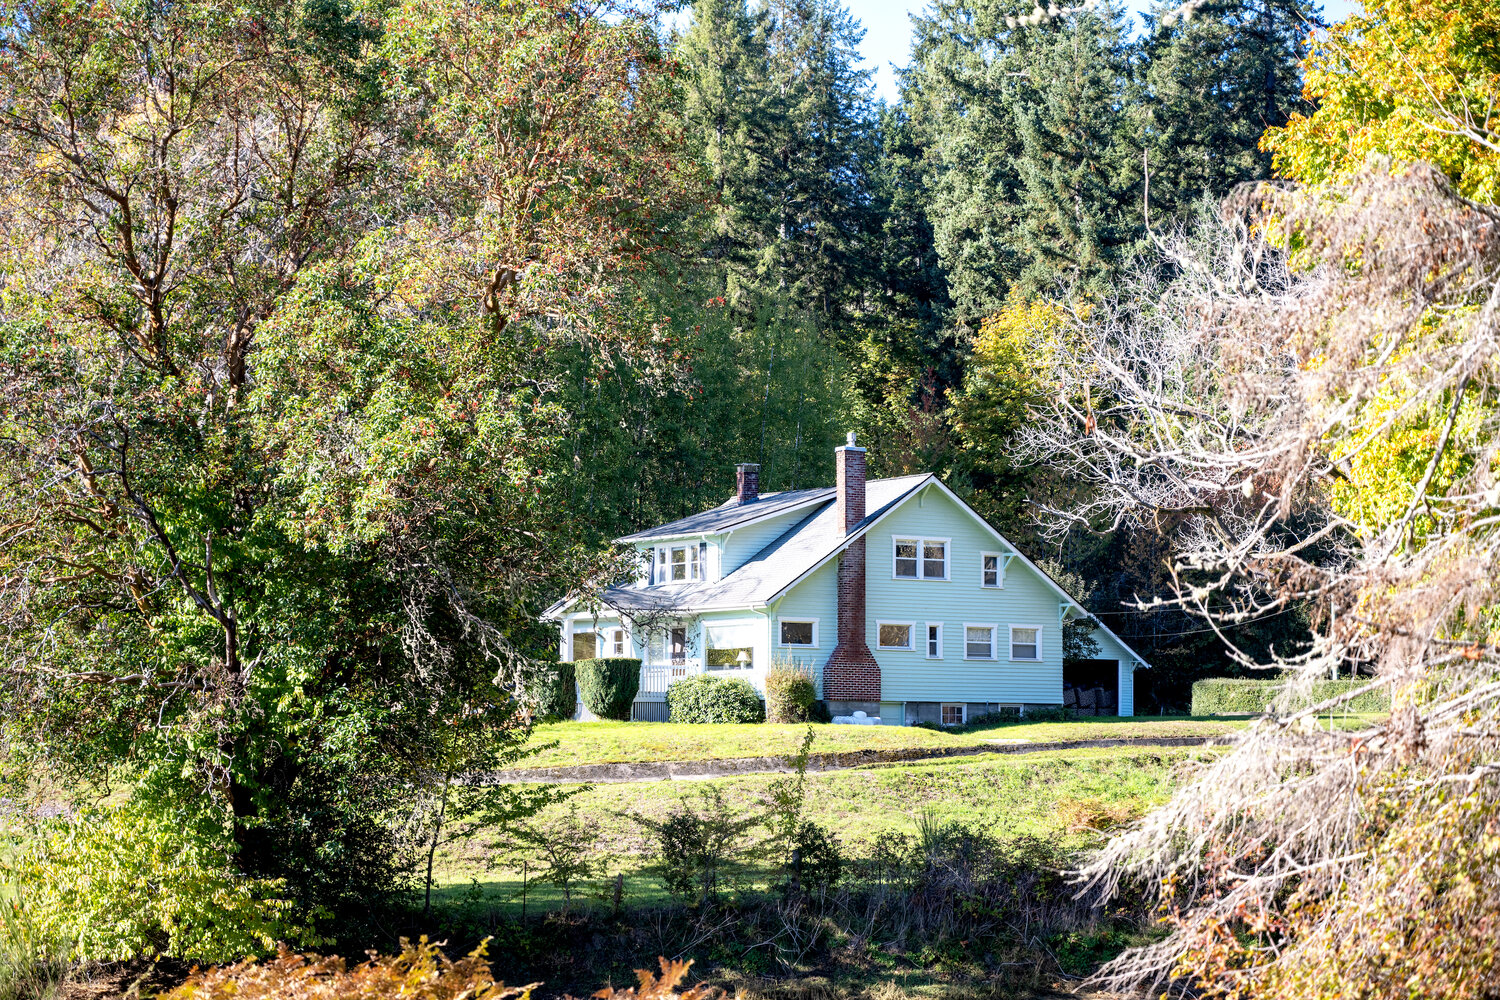 The 1926 farmhouse will be adapted to house camp staff.